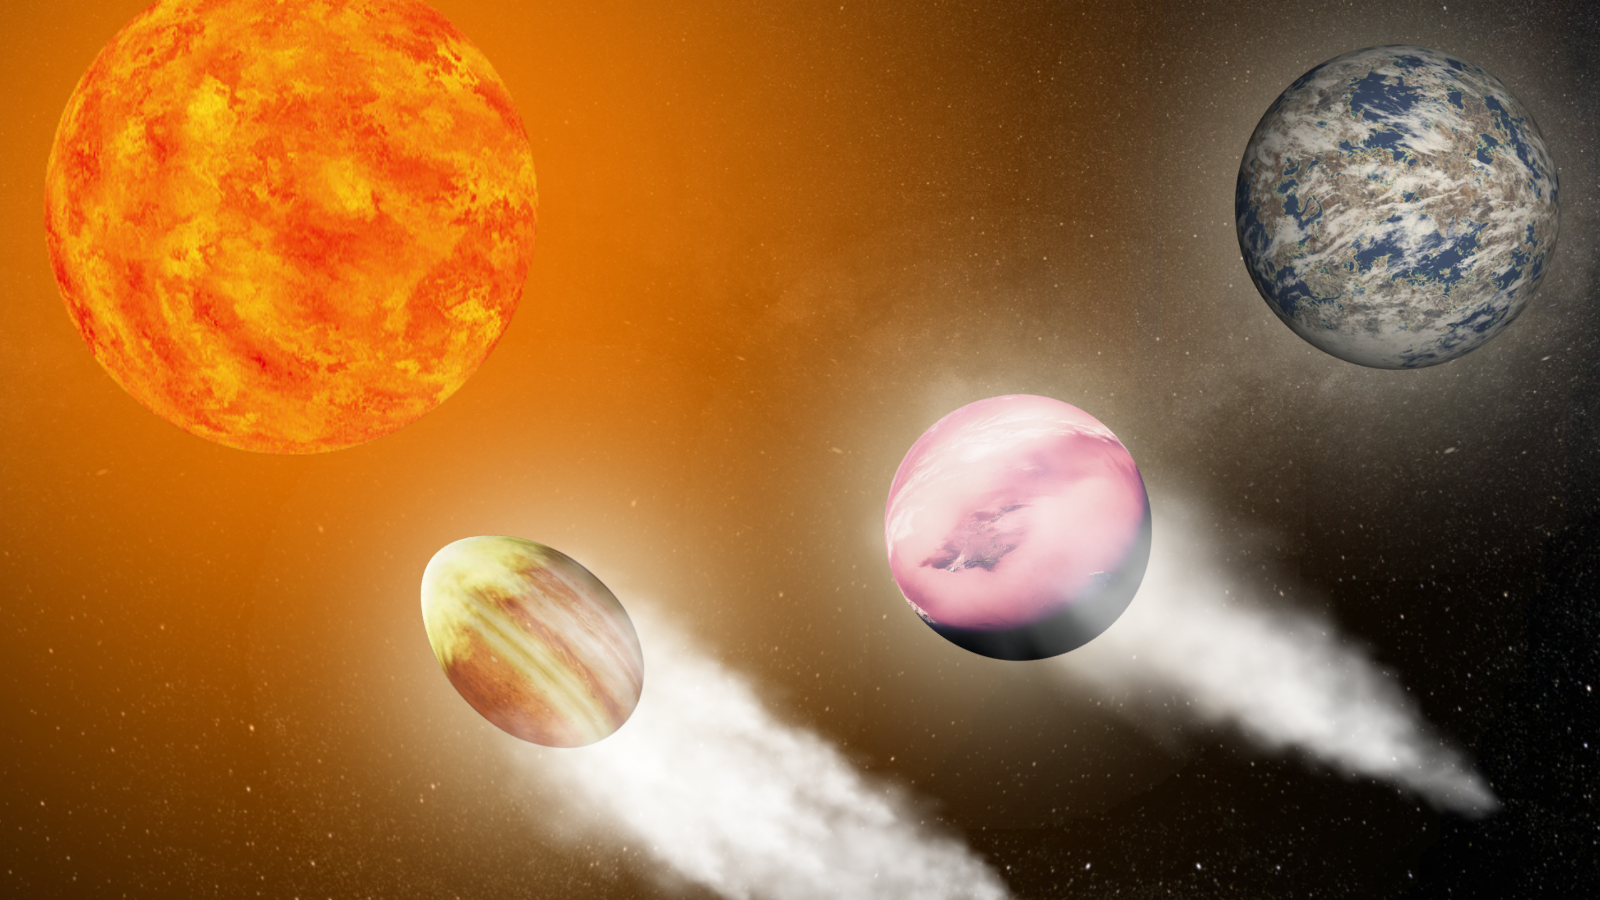 Stars give tiny planets a gravitational ‘squeeze’ to strip away their atmospheres Space